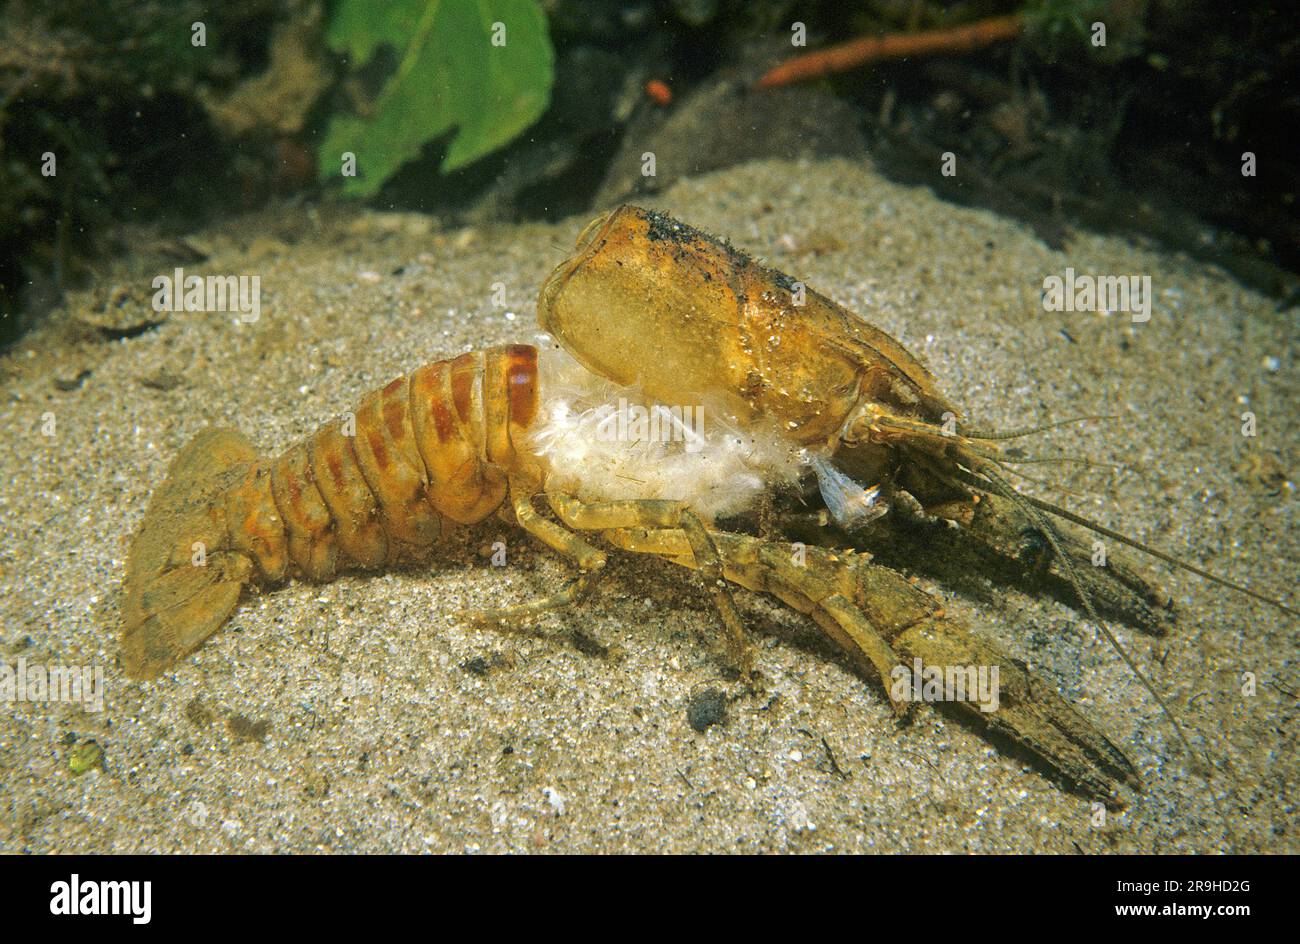 Empty hull of a River crayfish (Orconectes limosus), molting, Baden-Wuerttemberg, Germany, Europe Stock Photo